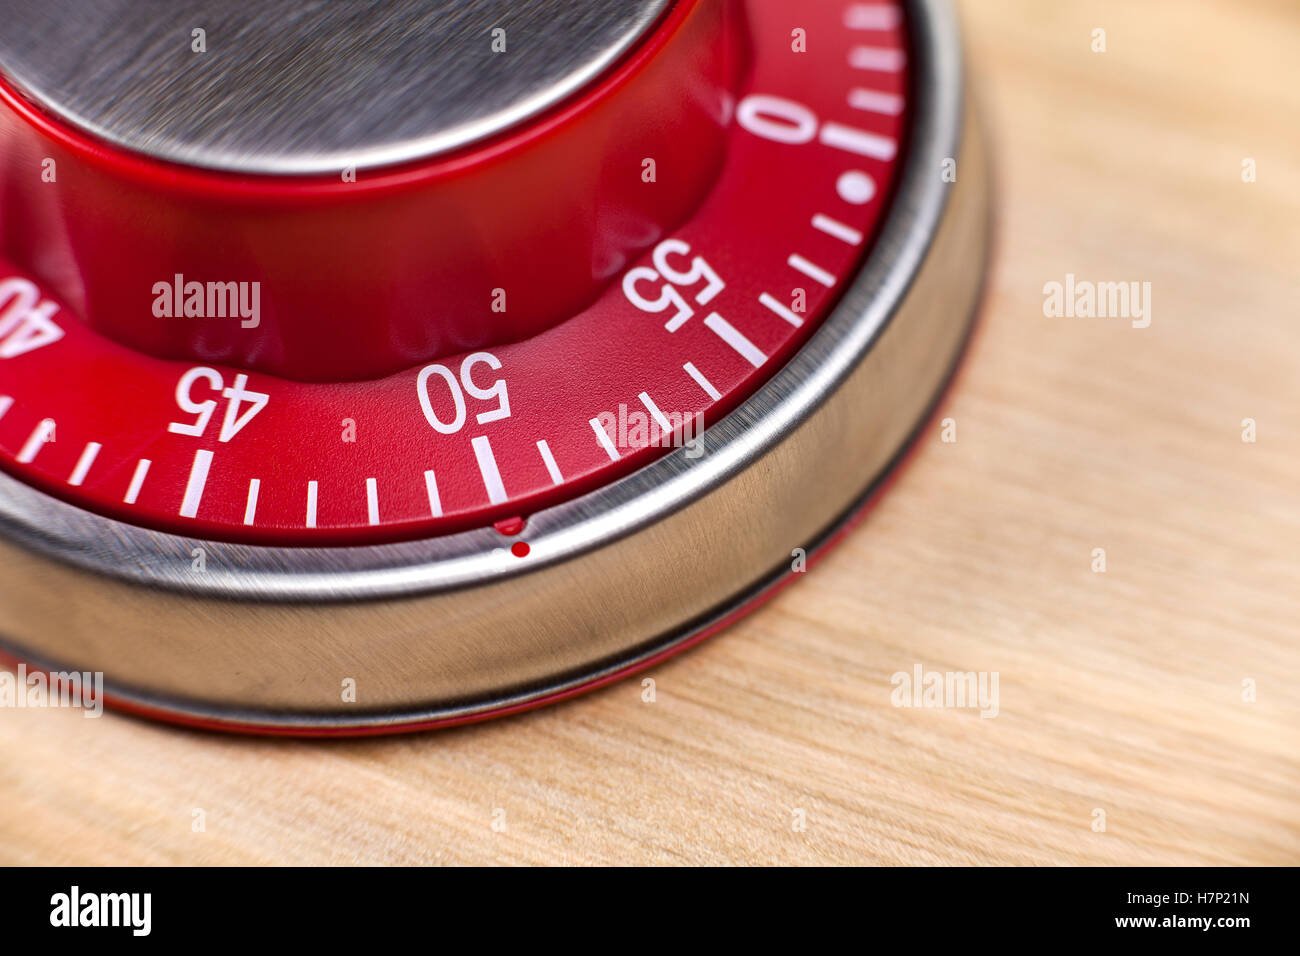 Macro view of a red kitchen egg timer showing 50 minutes on wooden background Stock Photo